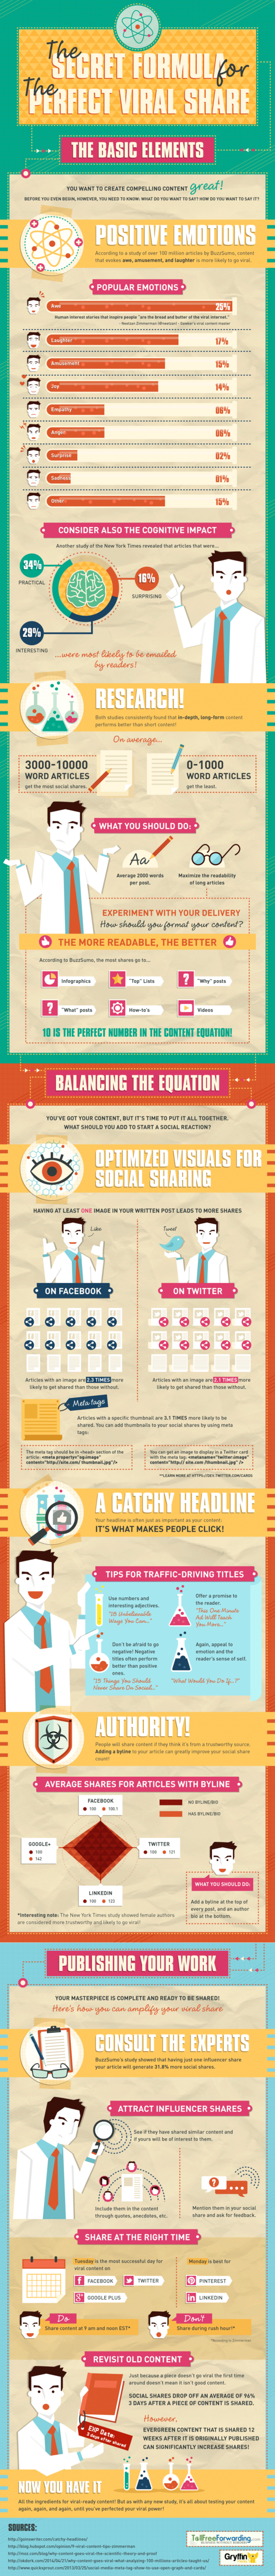 Going Viral Infographic